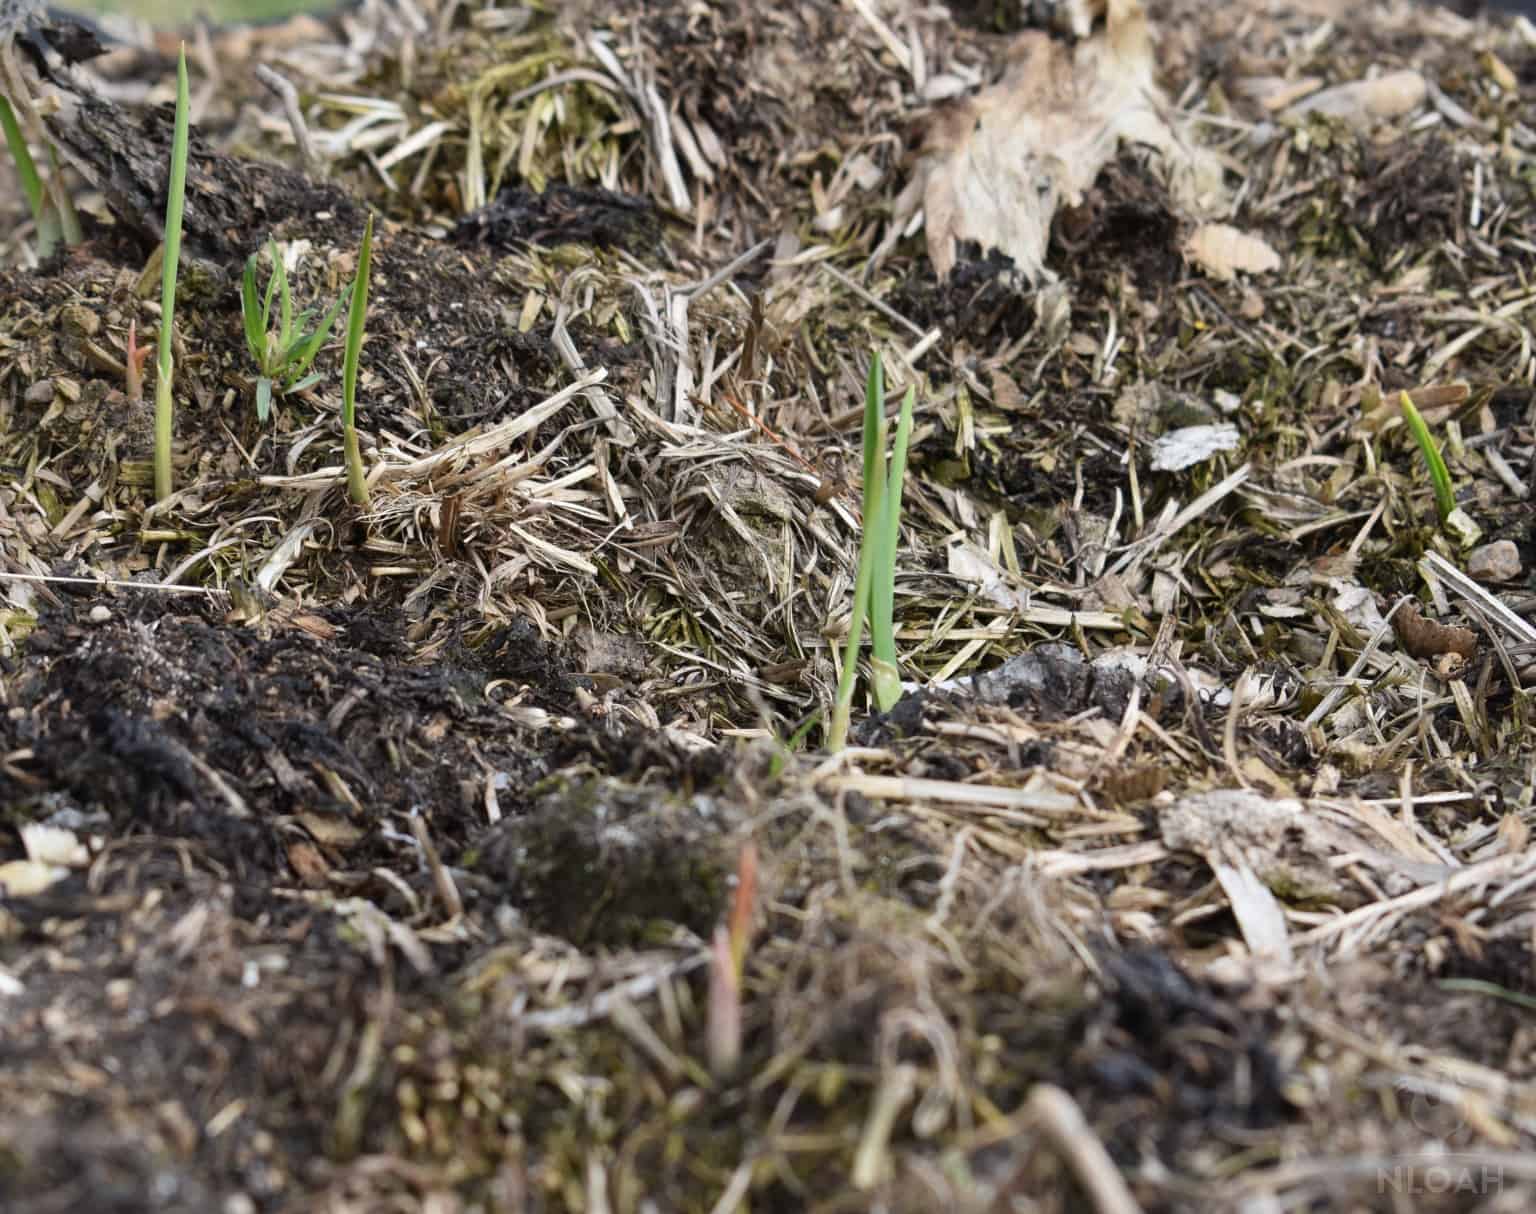 garlic shoots emerging in the spring